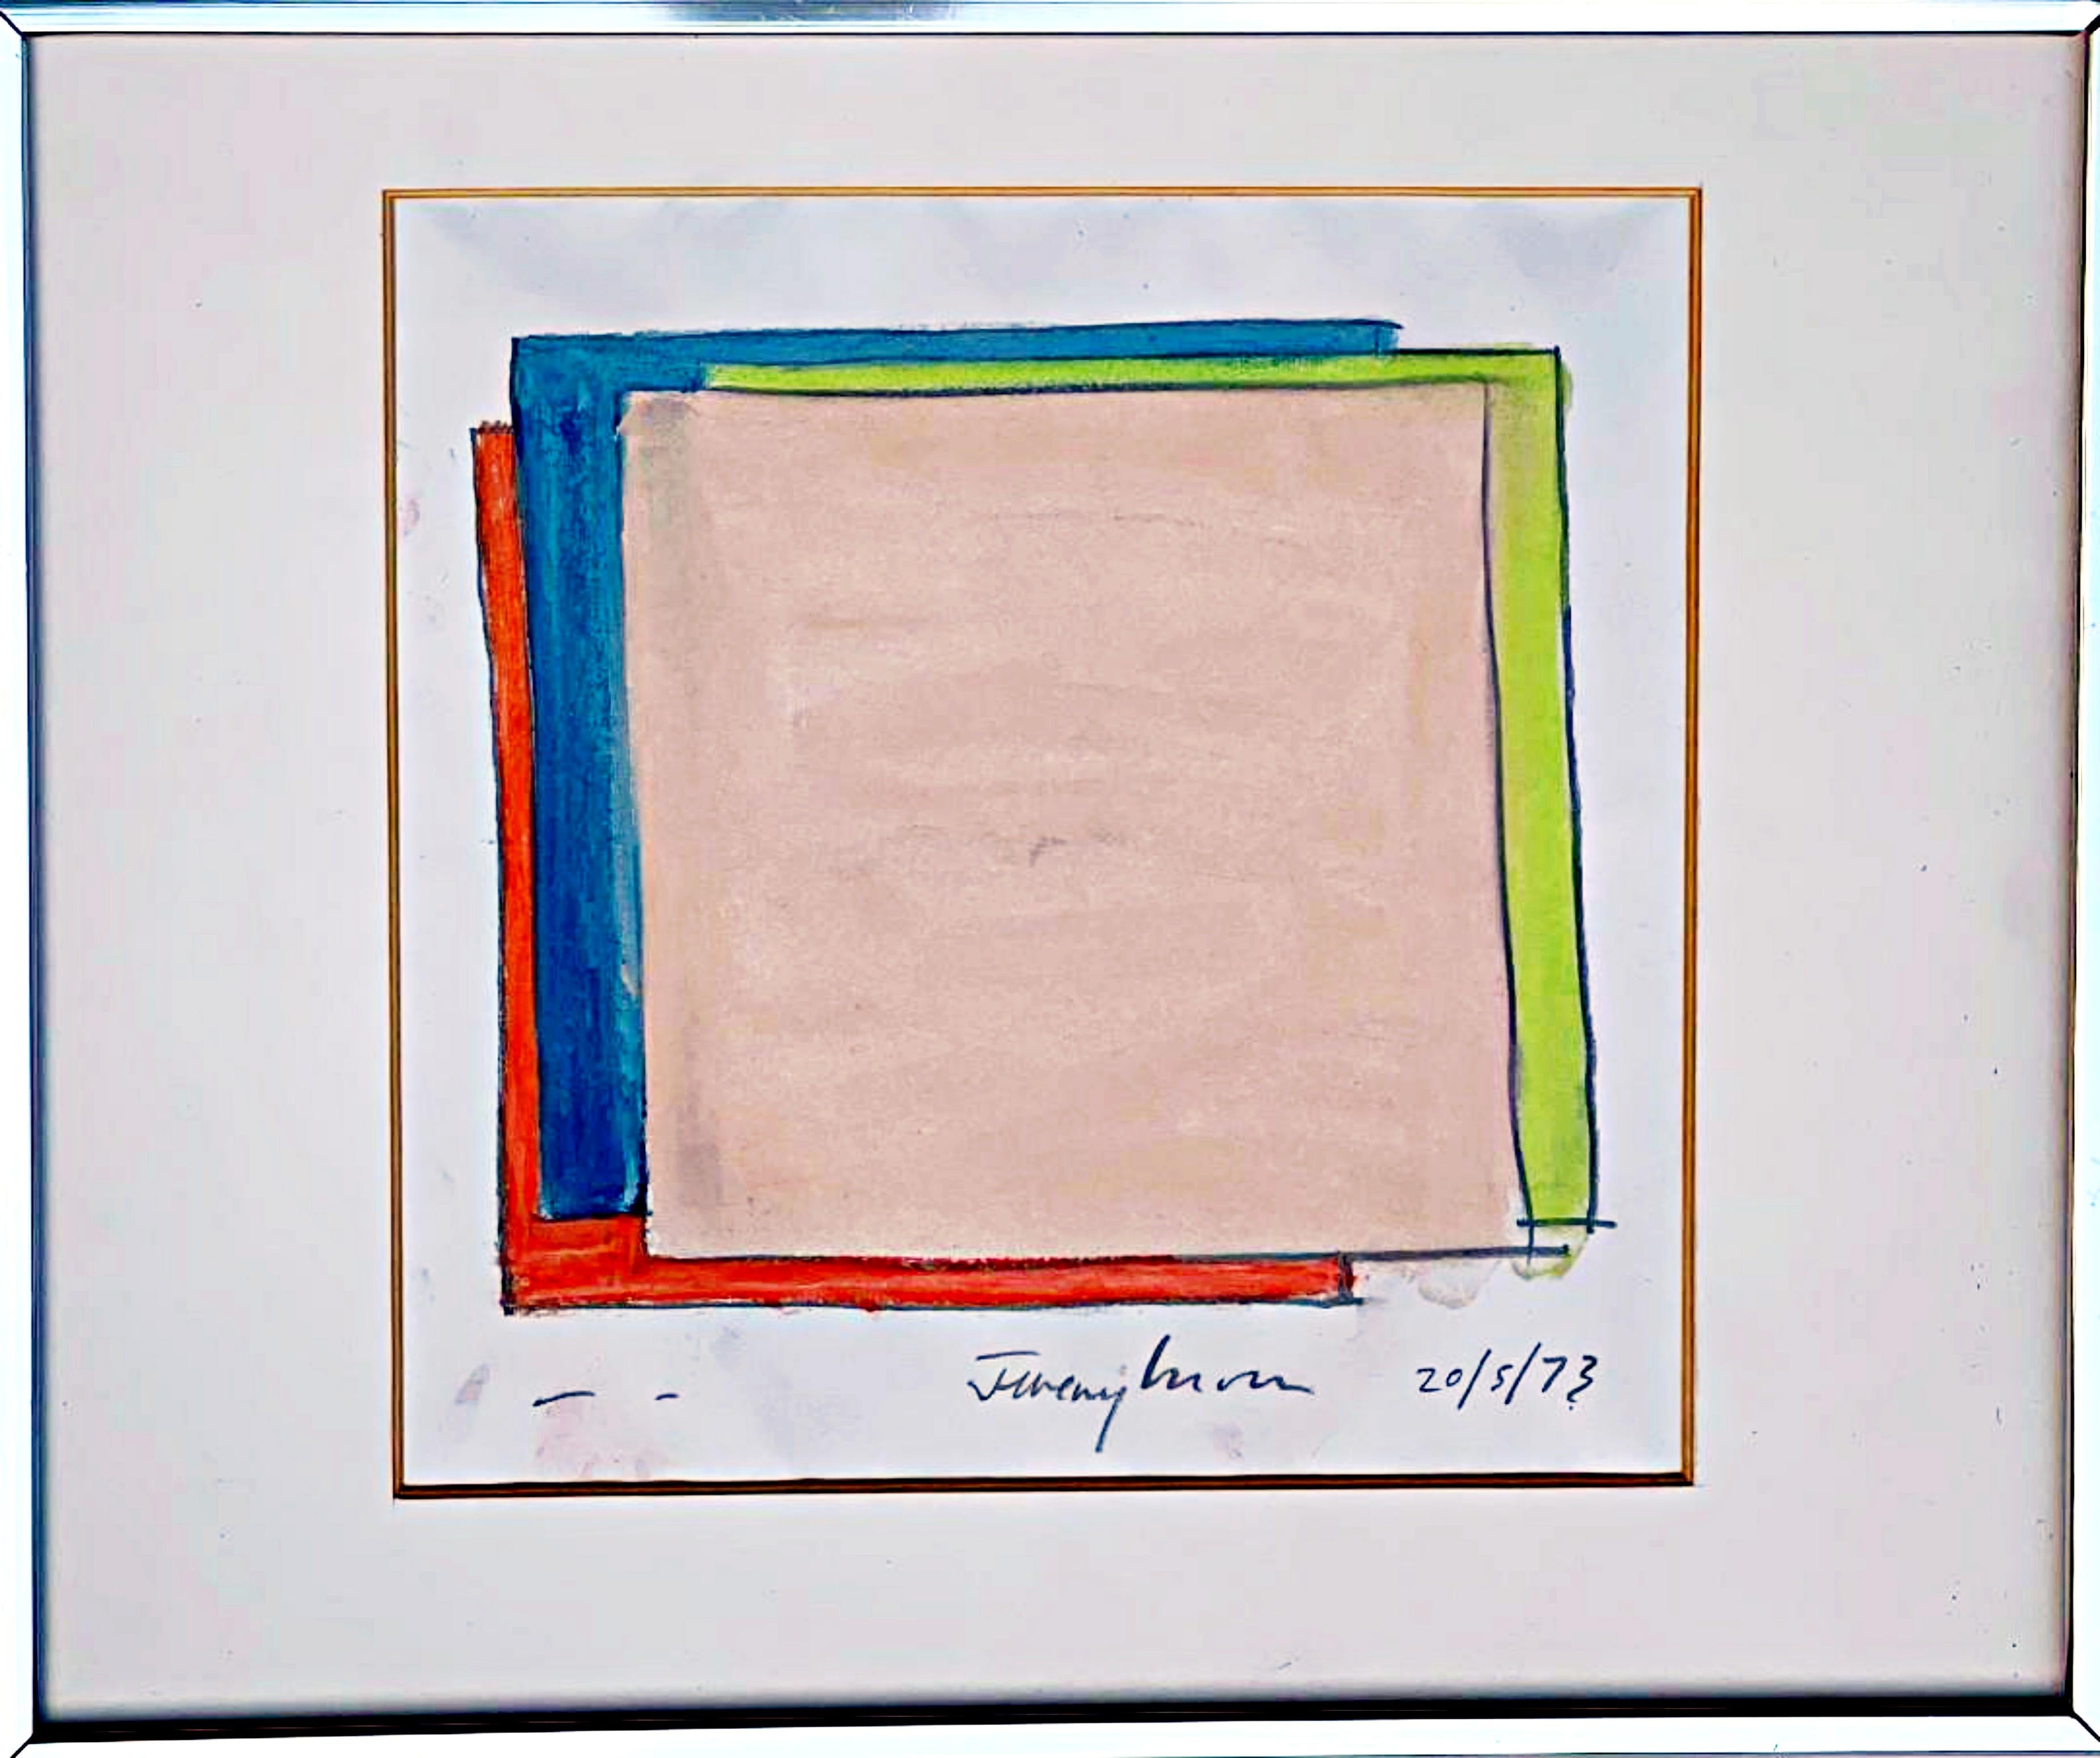 Jeremy Moon Abstract Painting - Unique signed pastel drawing by important British artist, Rowan Gallery UK 1973 